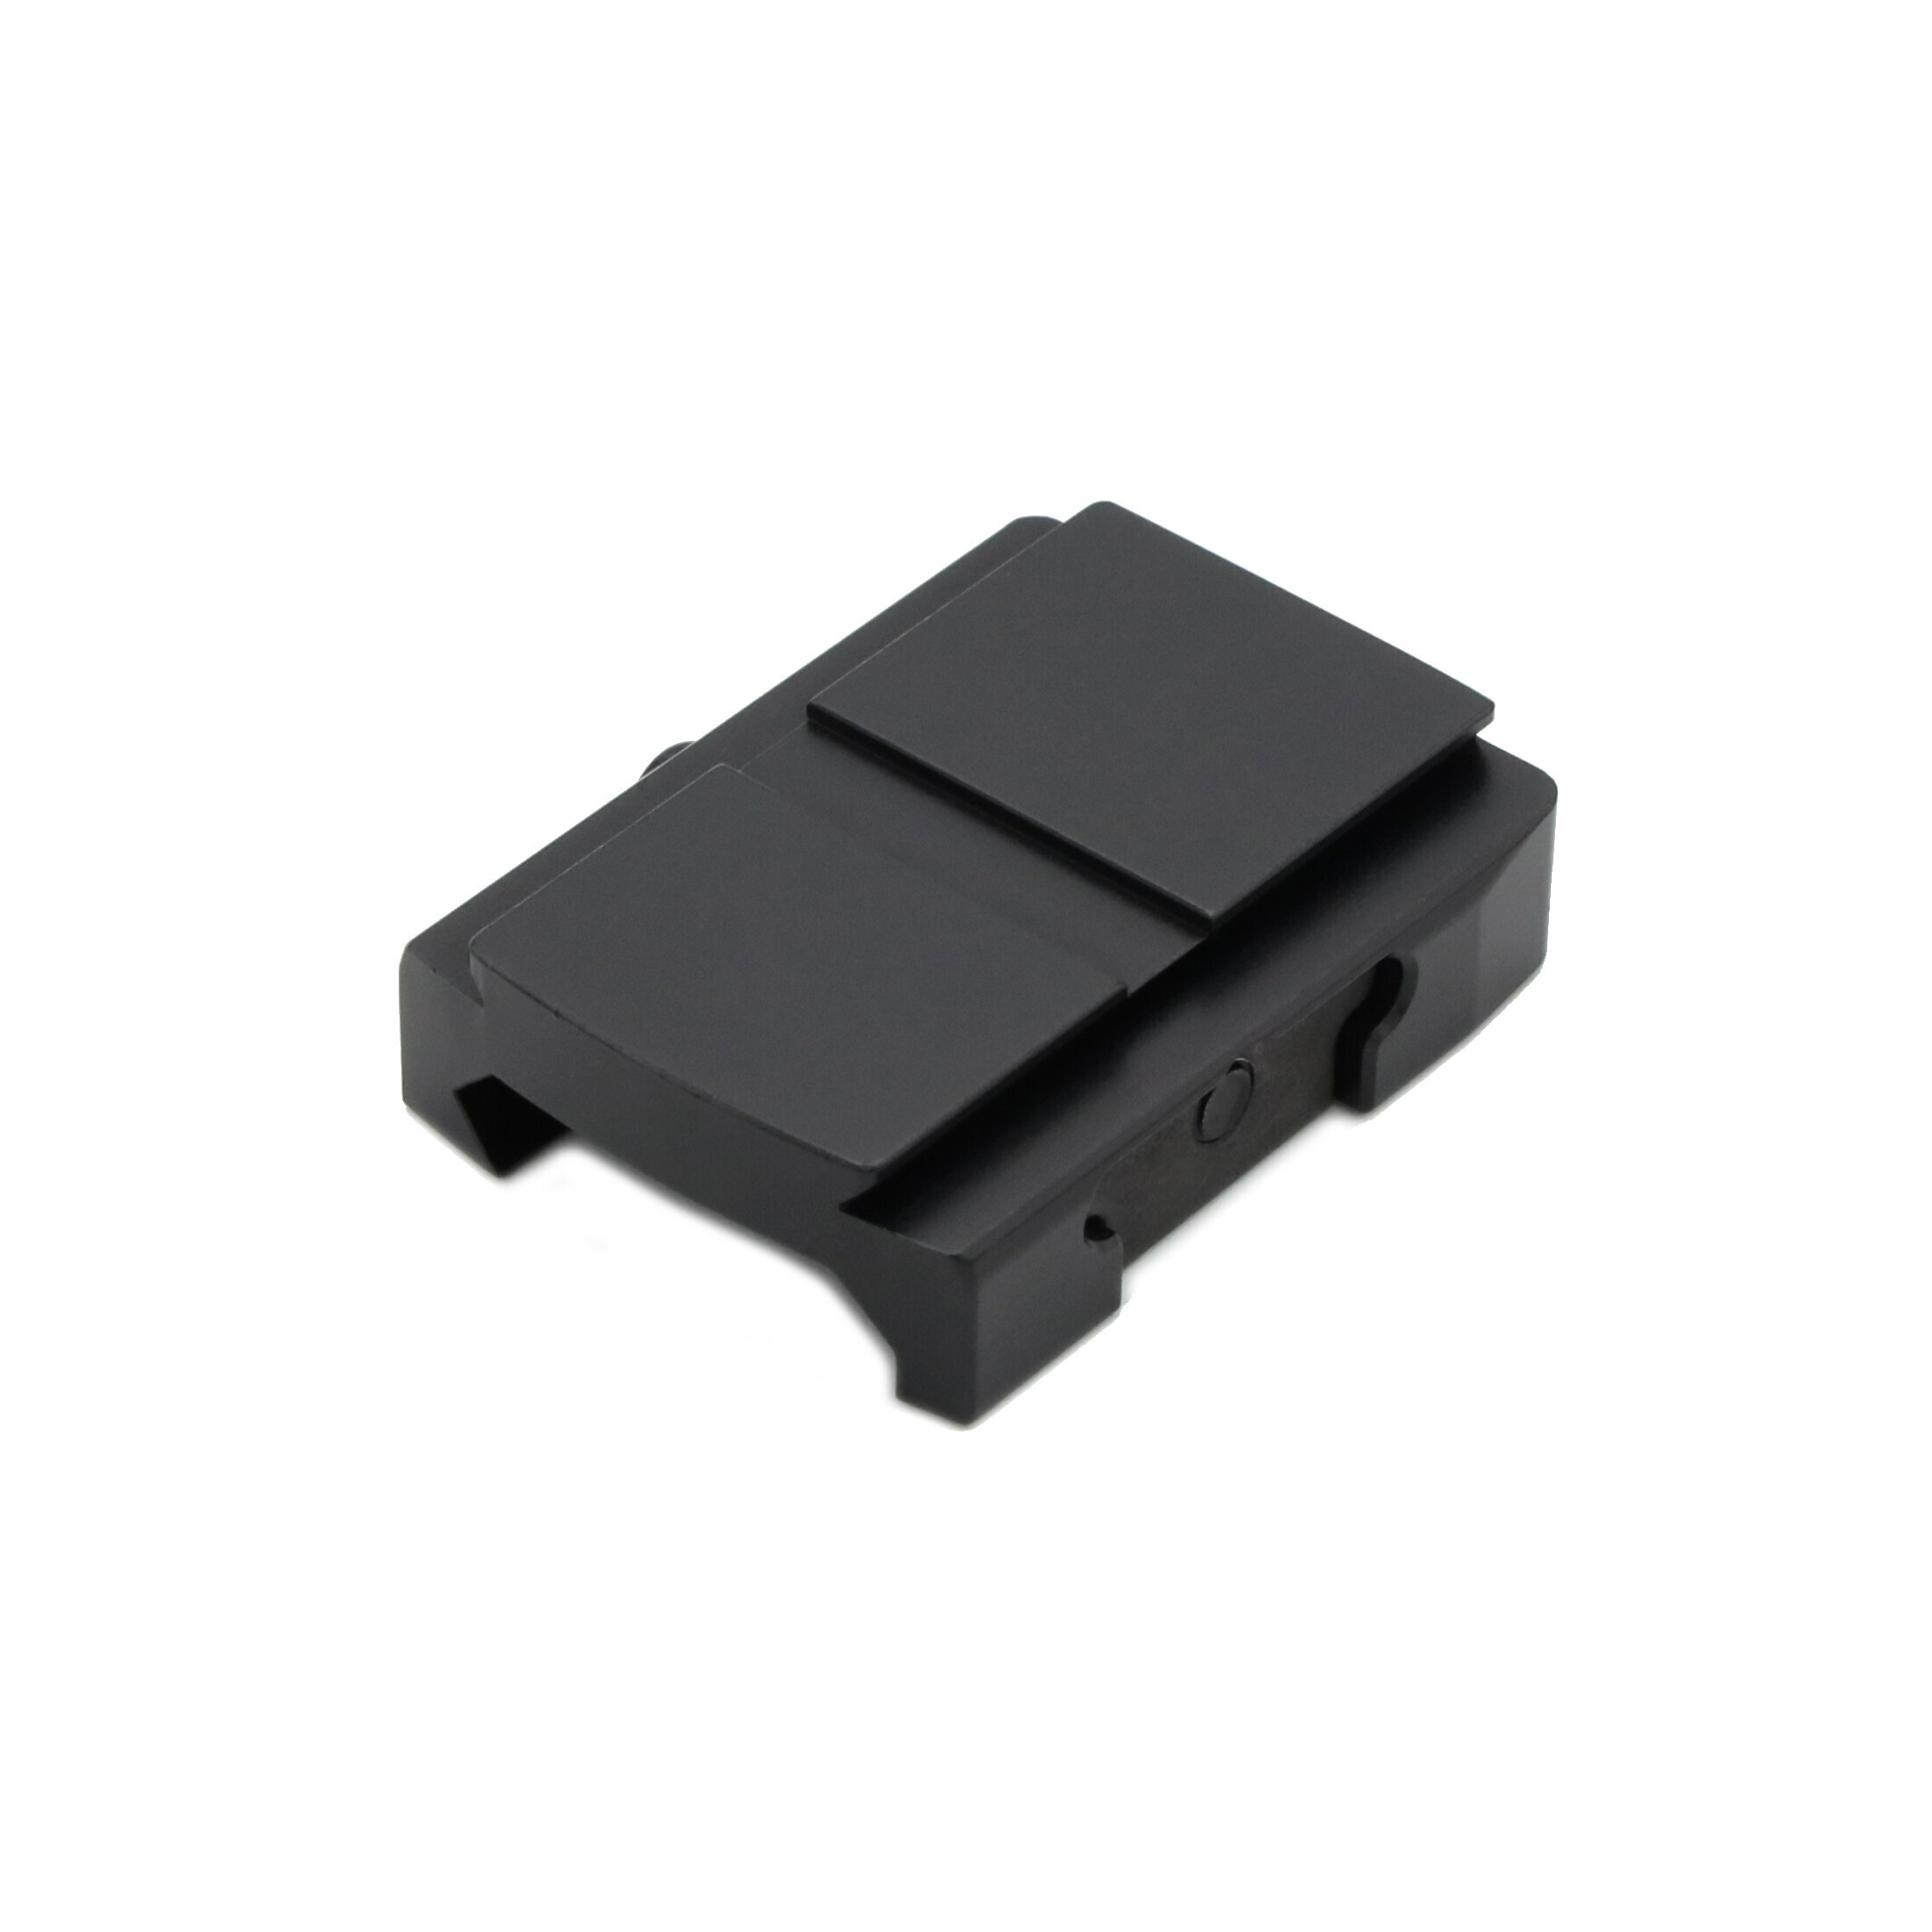 HOLOSUN 509 Adapter for PICATINNY